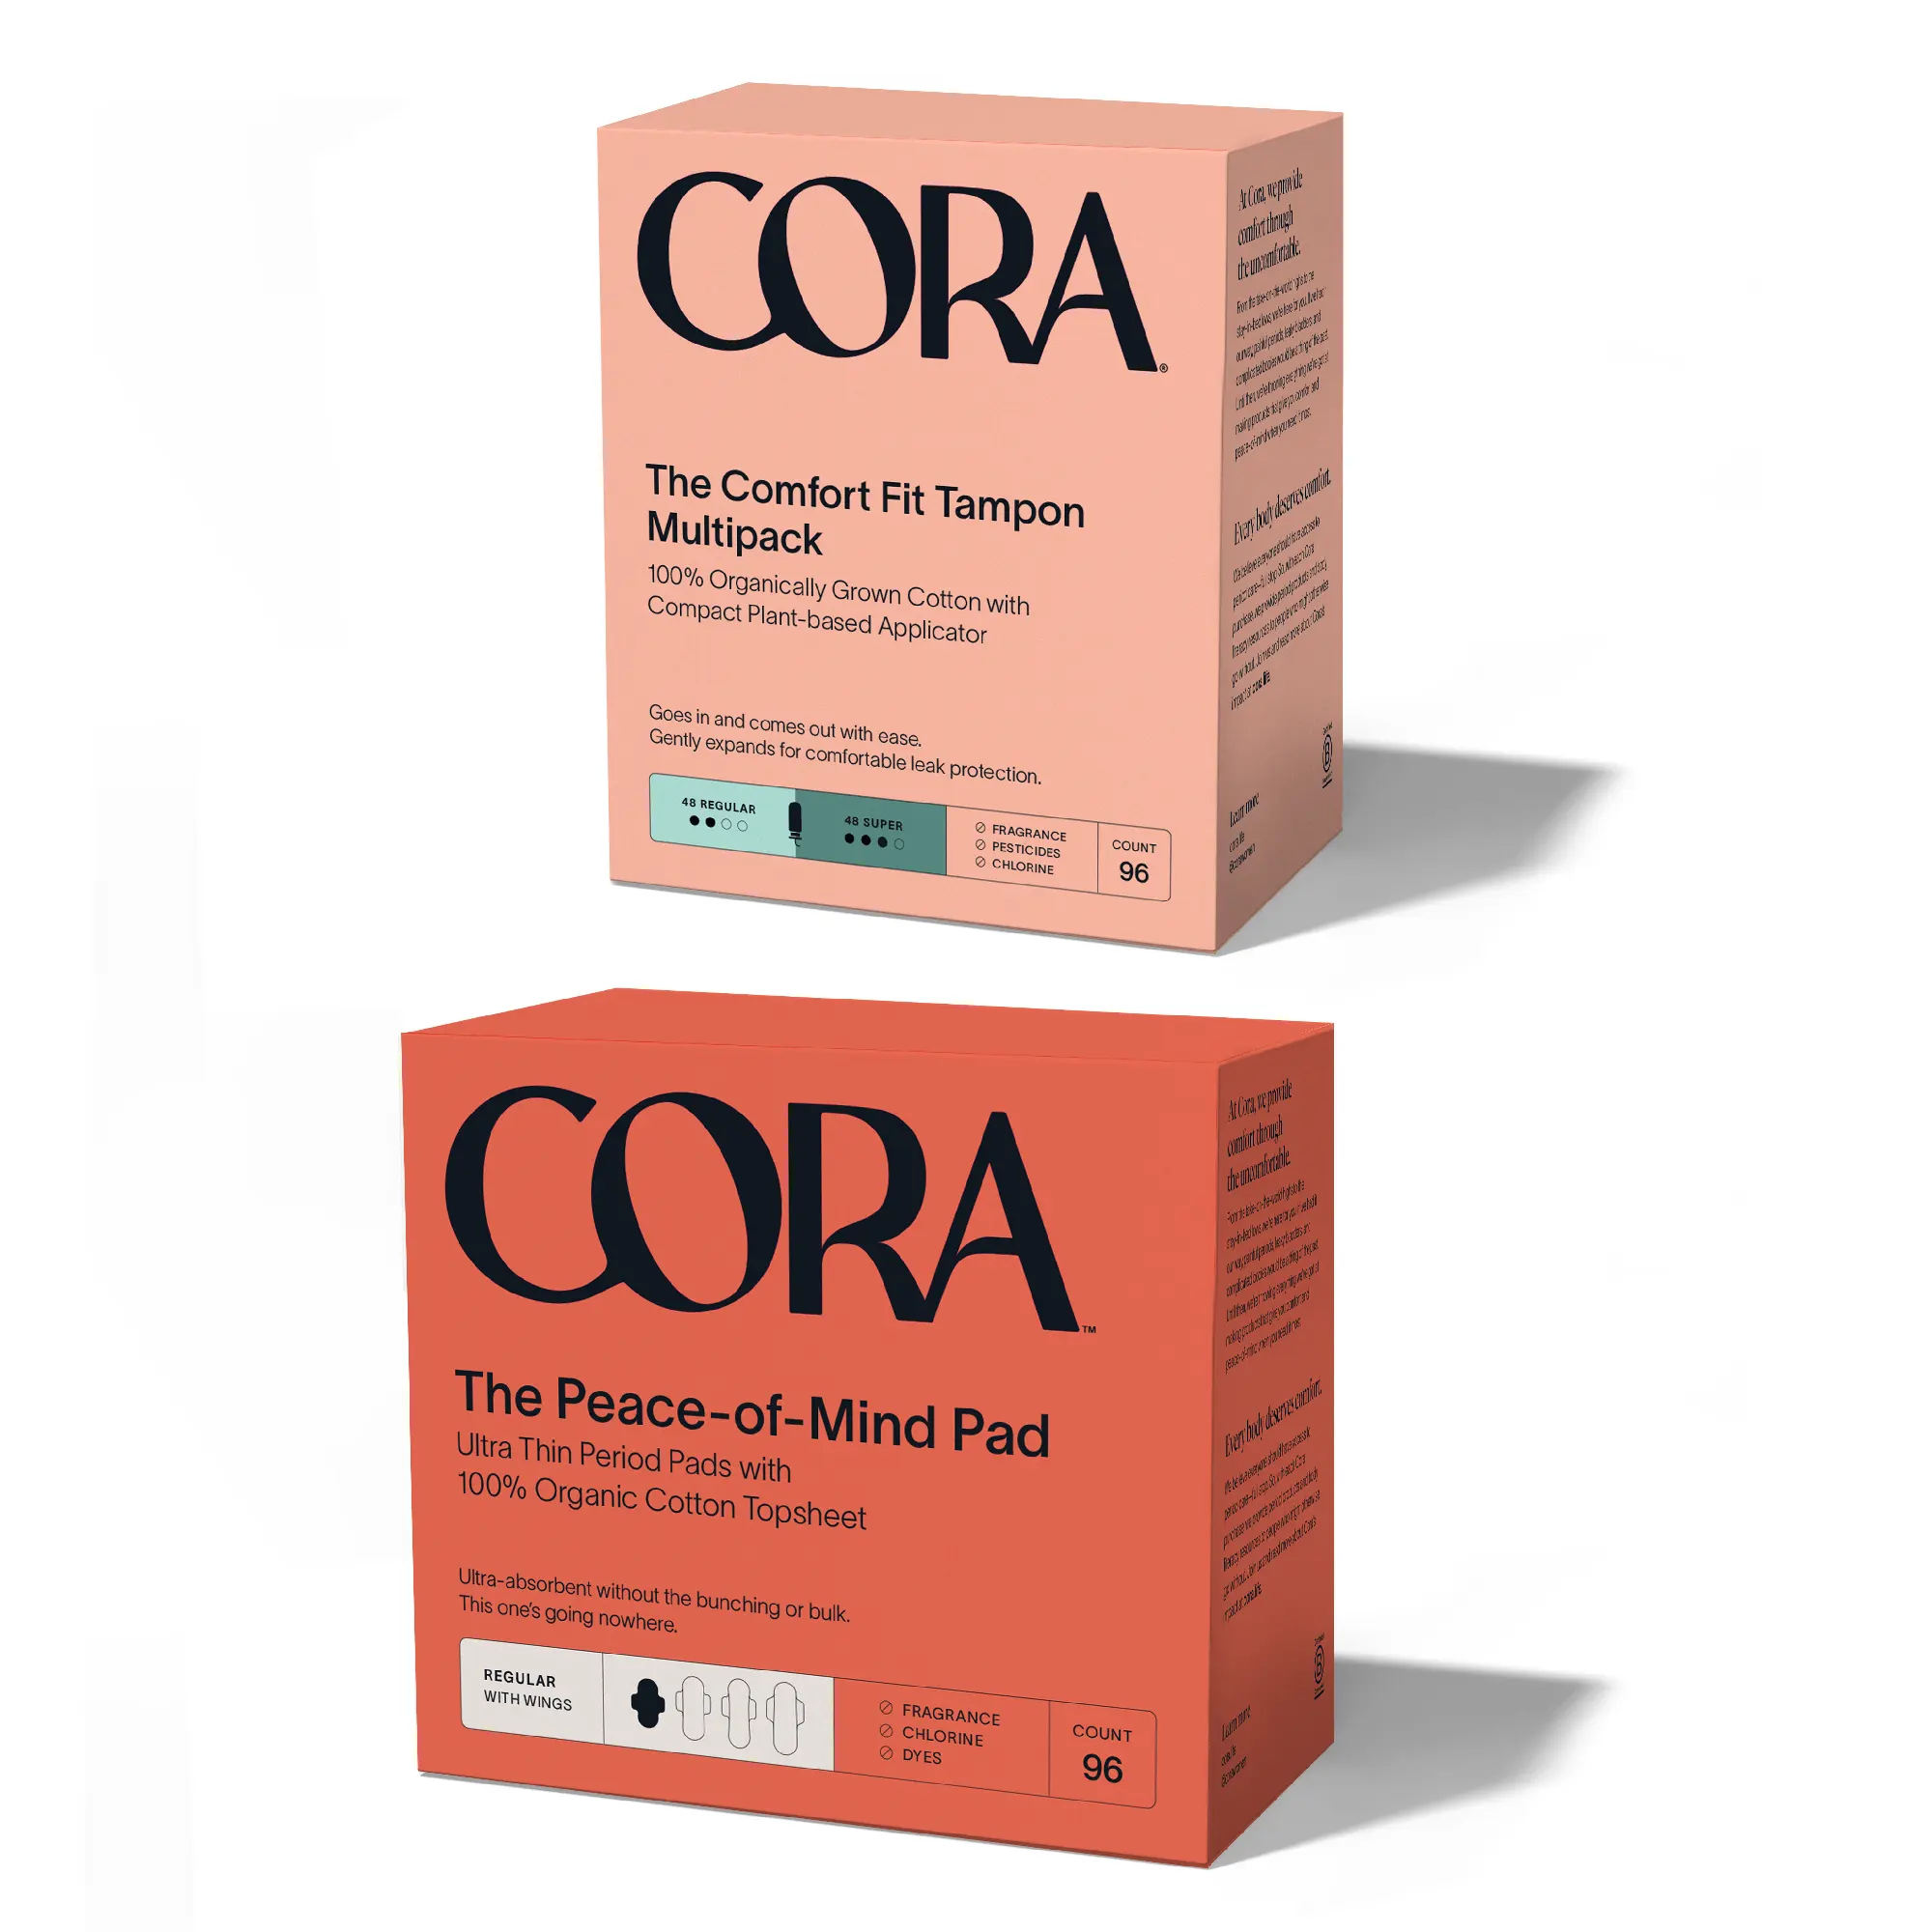 Save on Cora Cotton Regular Tampons with Compact Applicator